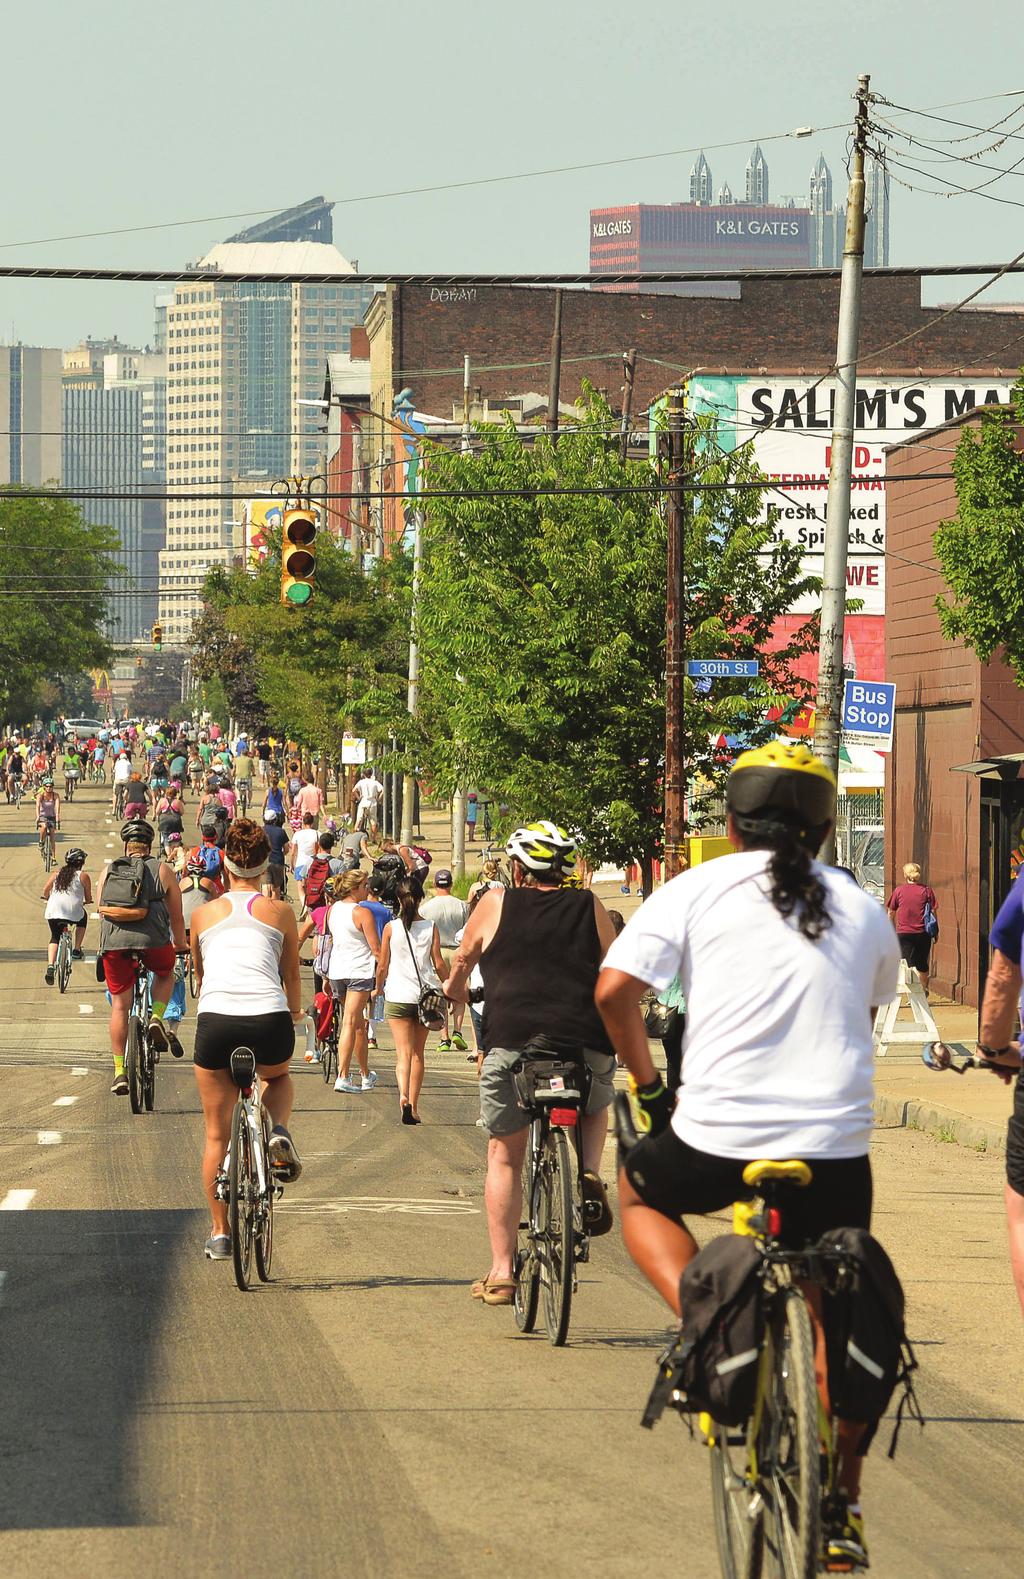 OUR VISION PITTSBURGH S BRIGHT FUTURE IS BUILT ON A DIVERSE TRANSPORTATION NETWORK THAT SAFELY CONNECTS ALL PEOPLE TO THEIR DESTINATIONS.